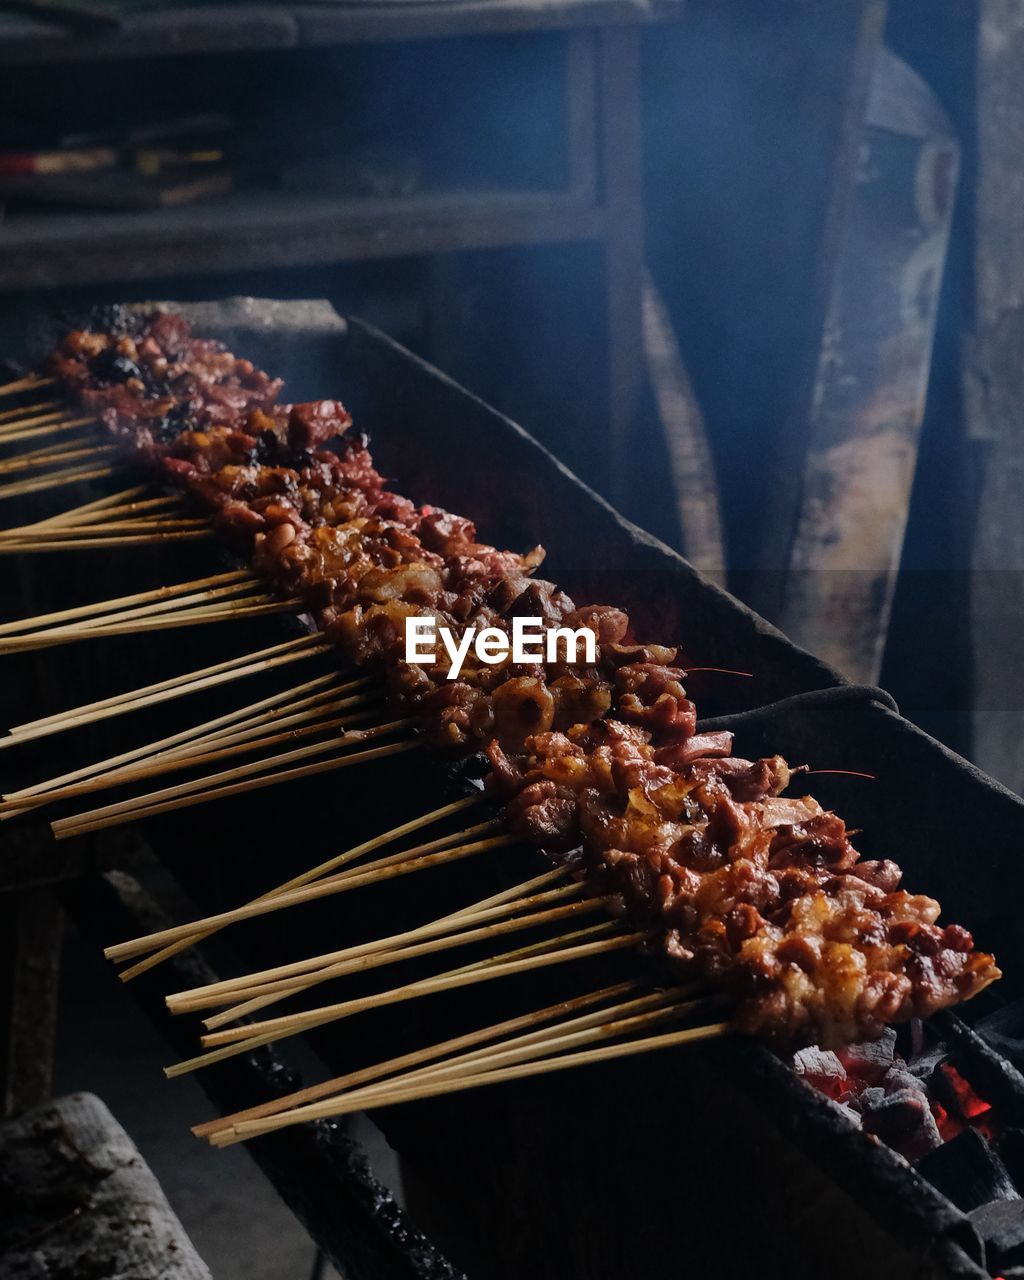 HIGH ANGLE VIEW OF FOOD ON BARBECUE GRILL